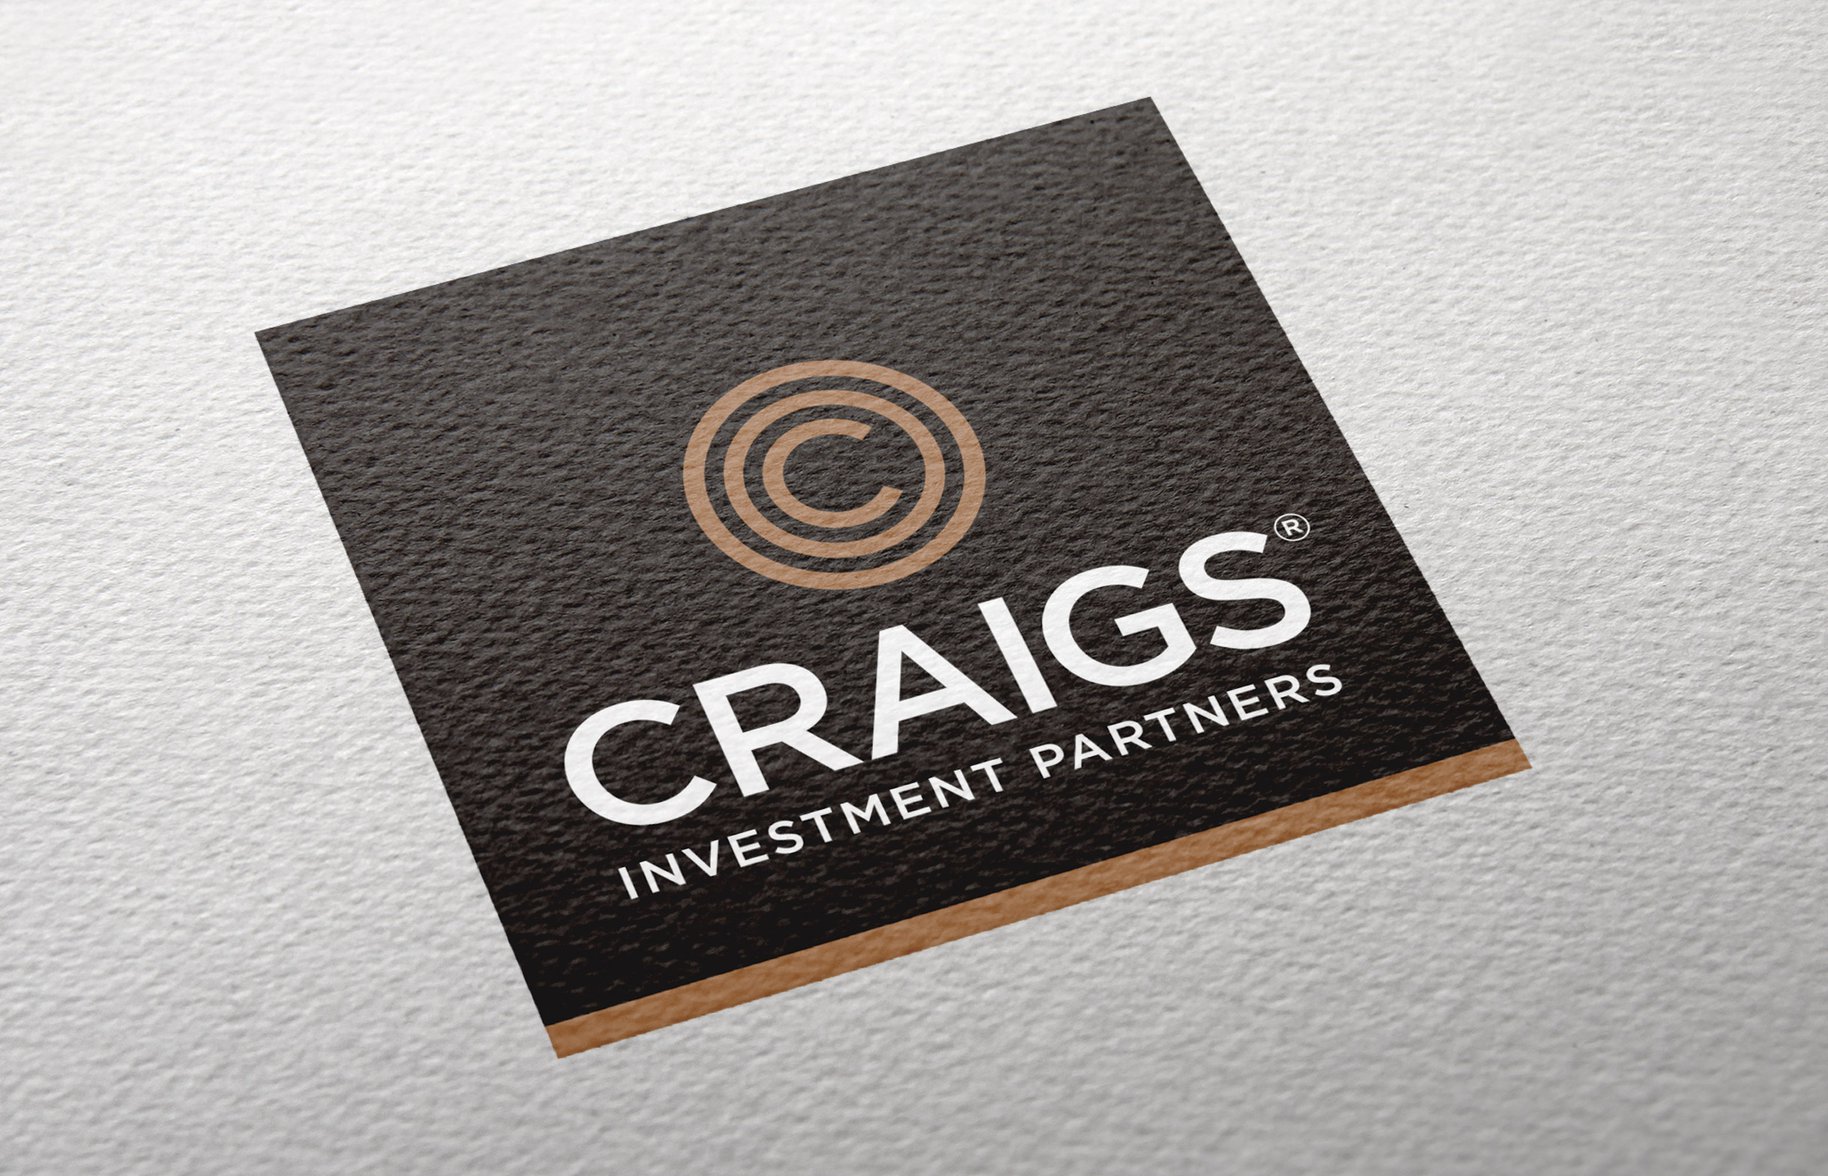 Craigs Investment Partners logo on textured paper